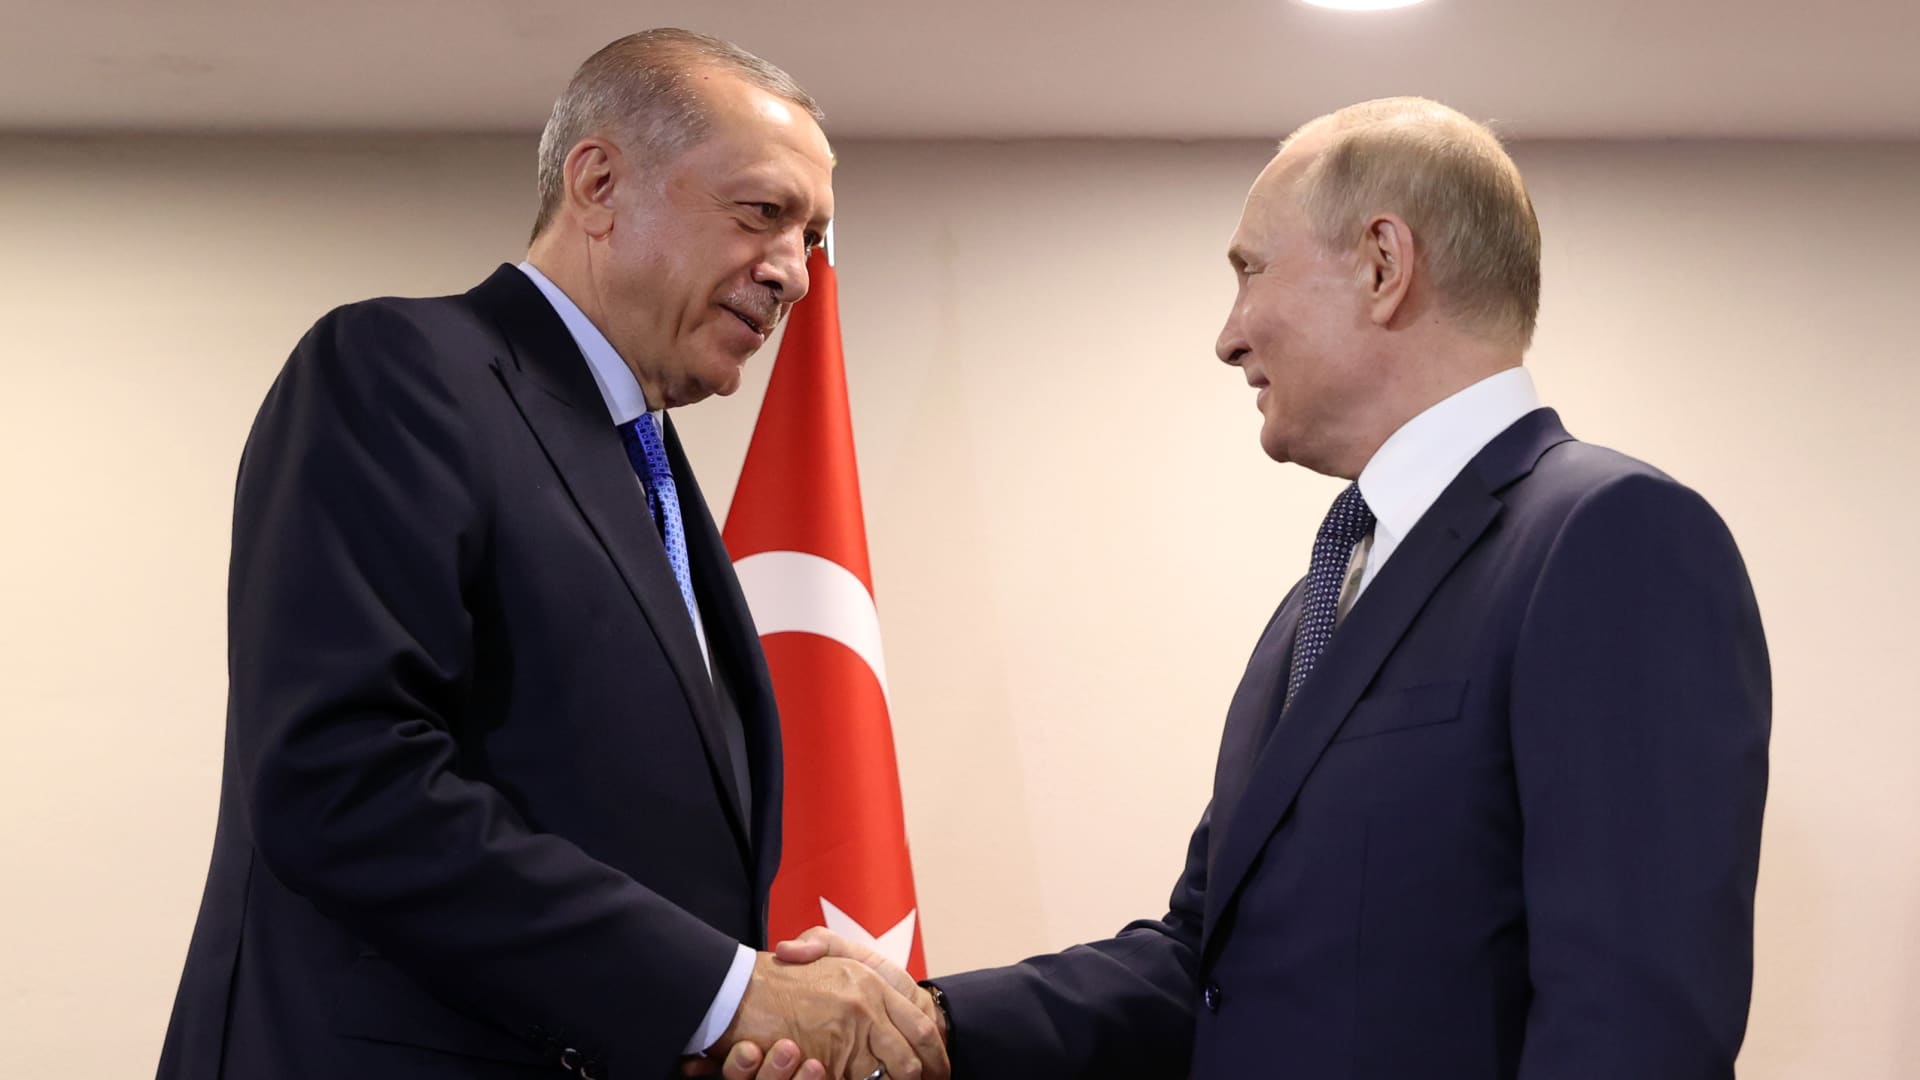 Turkey’s Erdogan touts ‘special relationship’ with Putin, stands by his refusal to impose sanctions